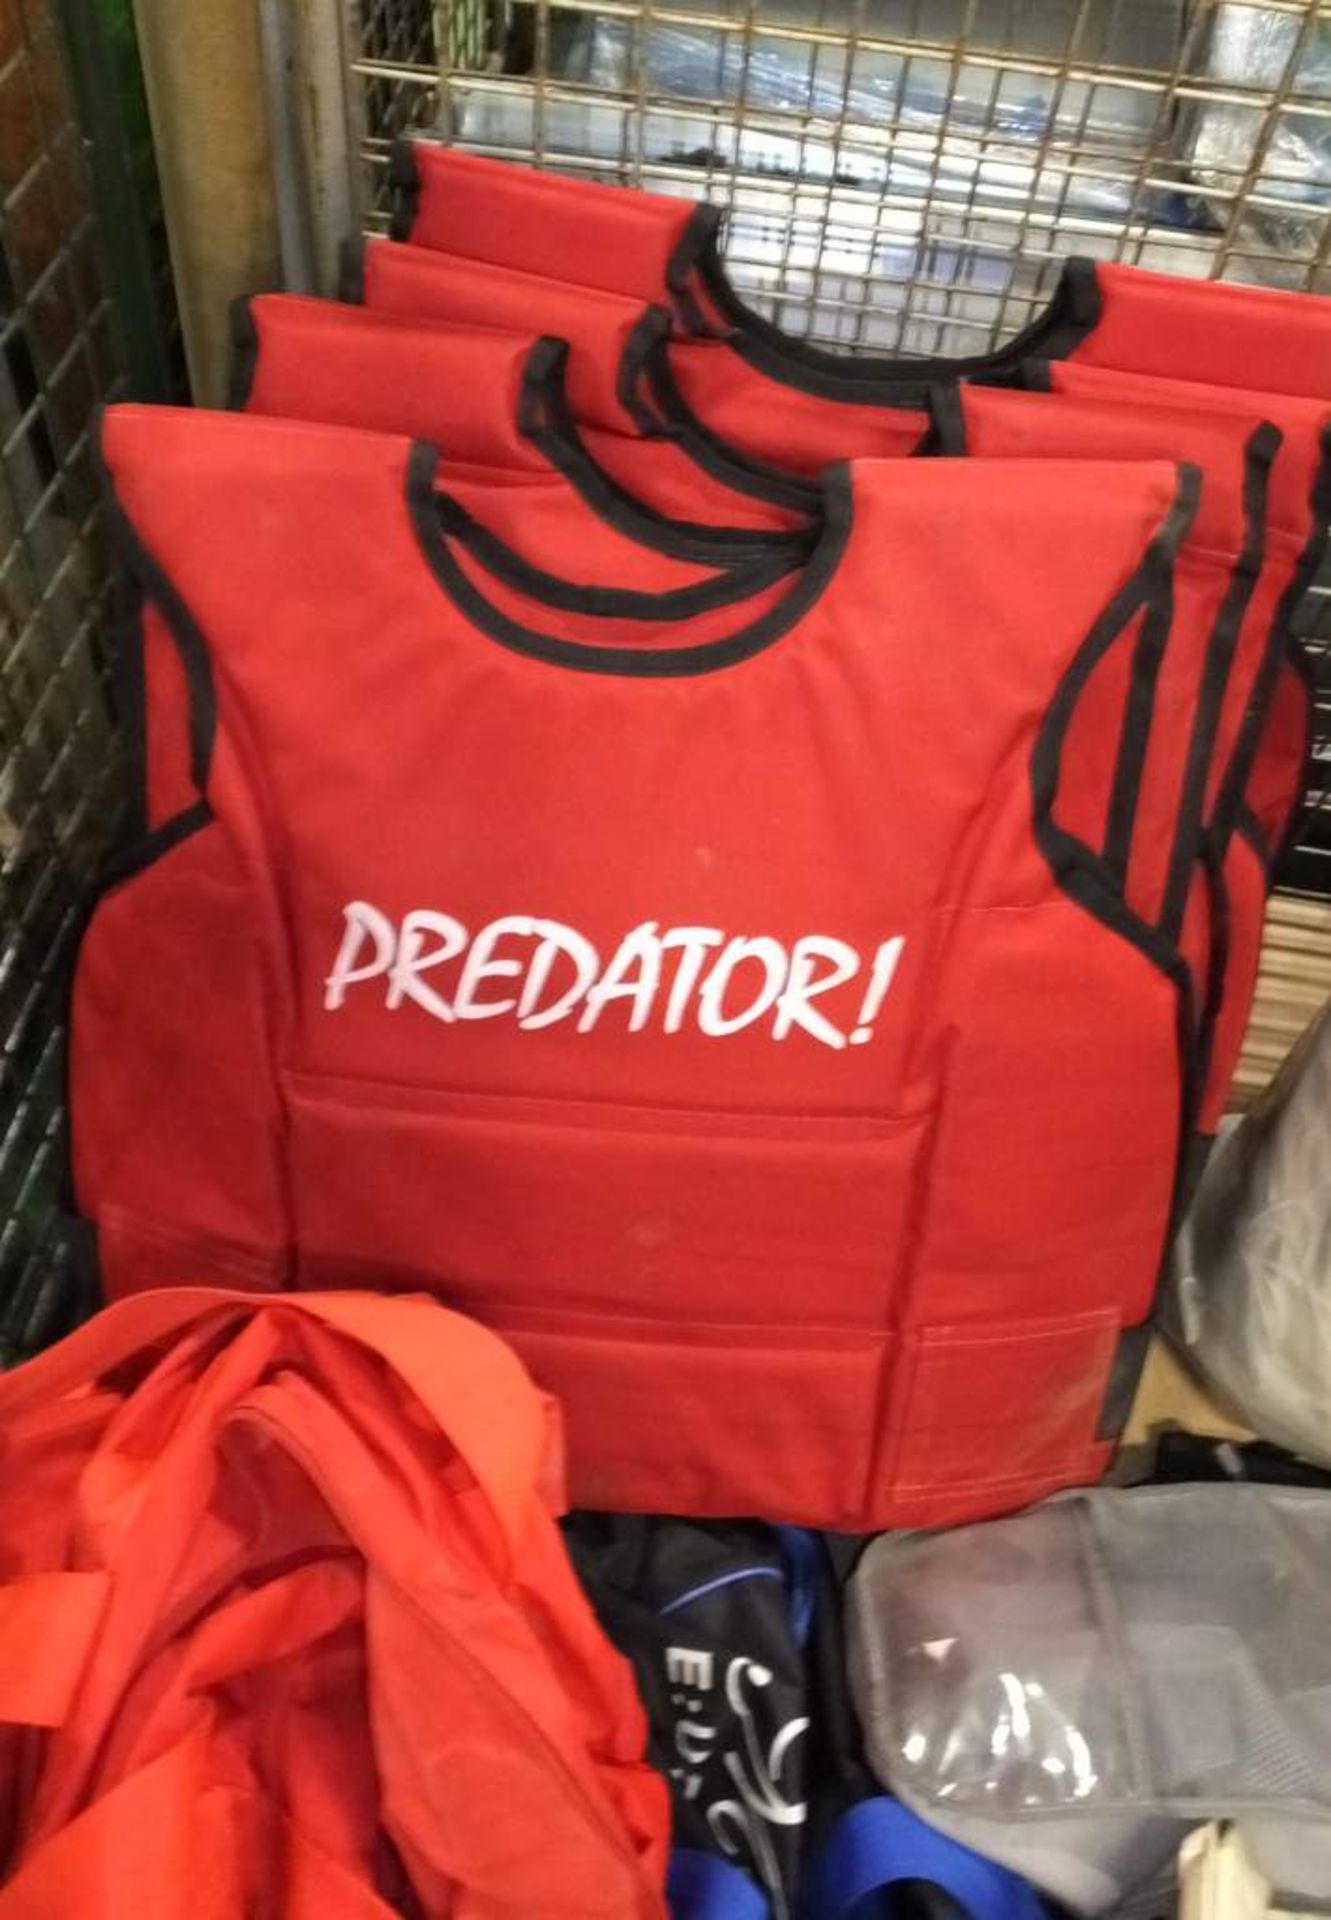 Various sporting equipment - Predator padded vests, sports bags & nets - Image 2 of 4